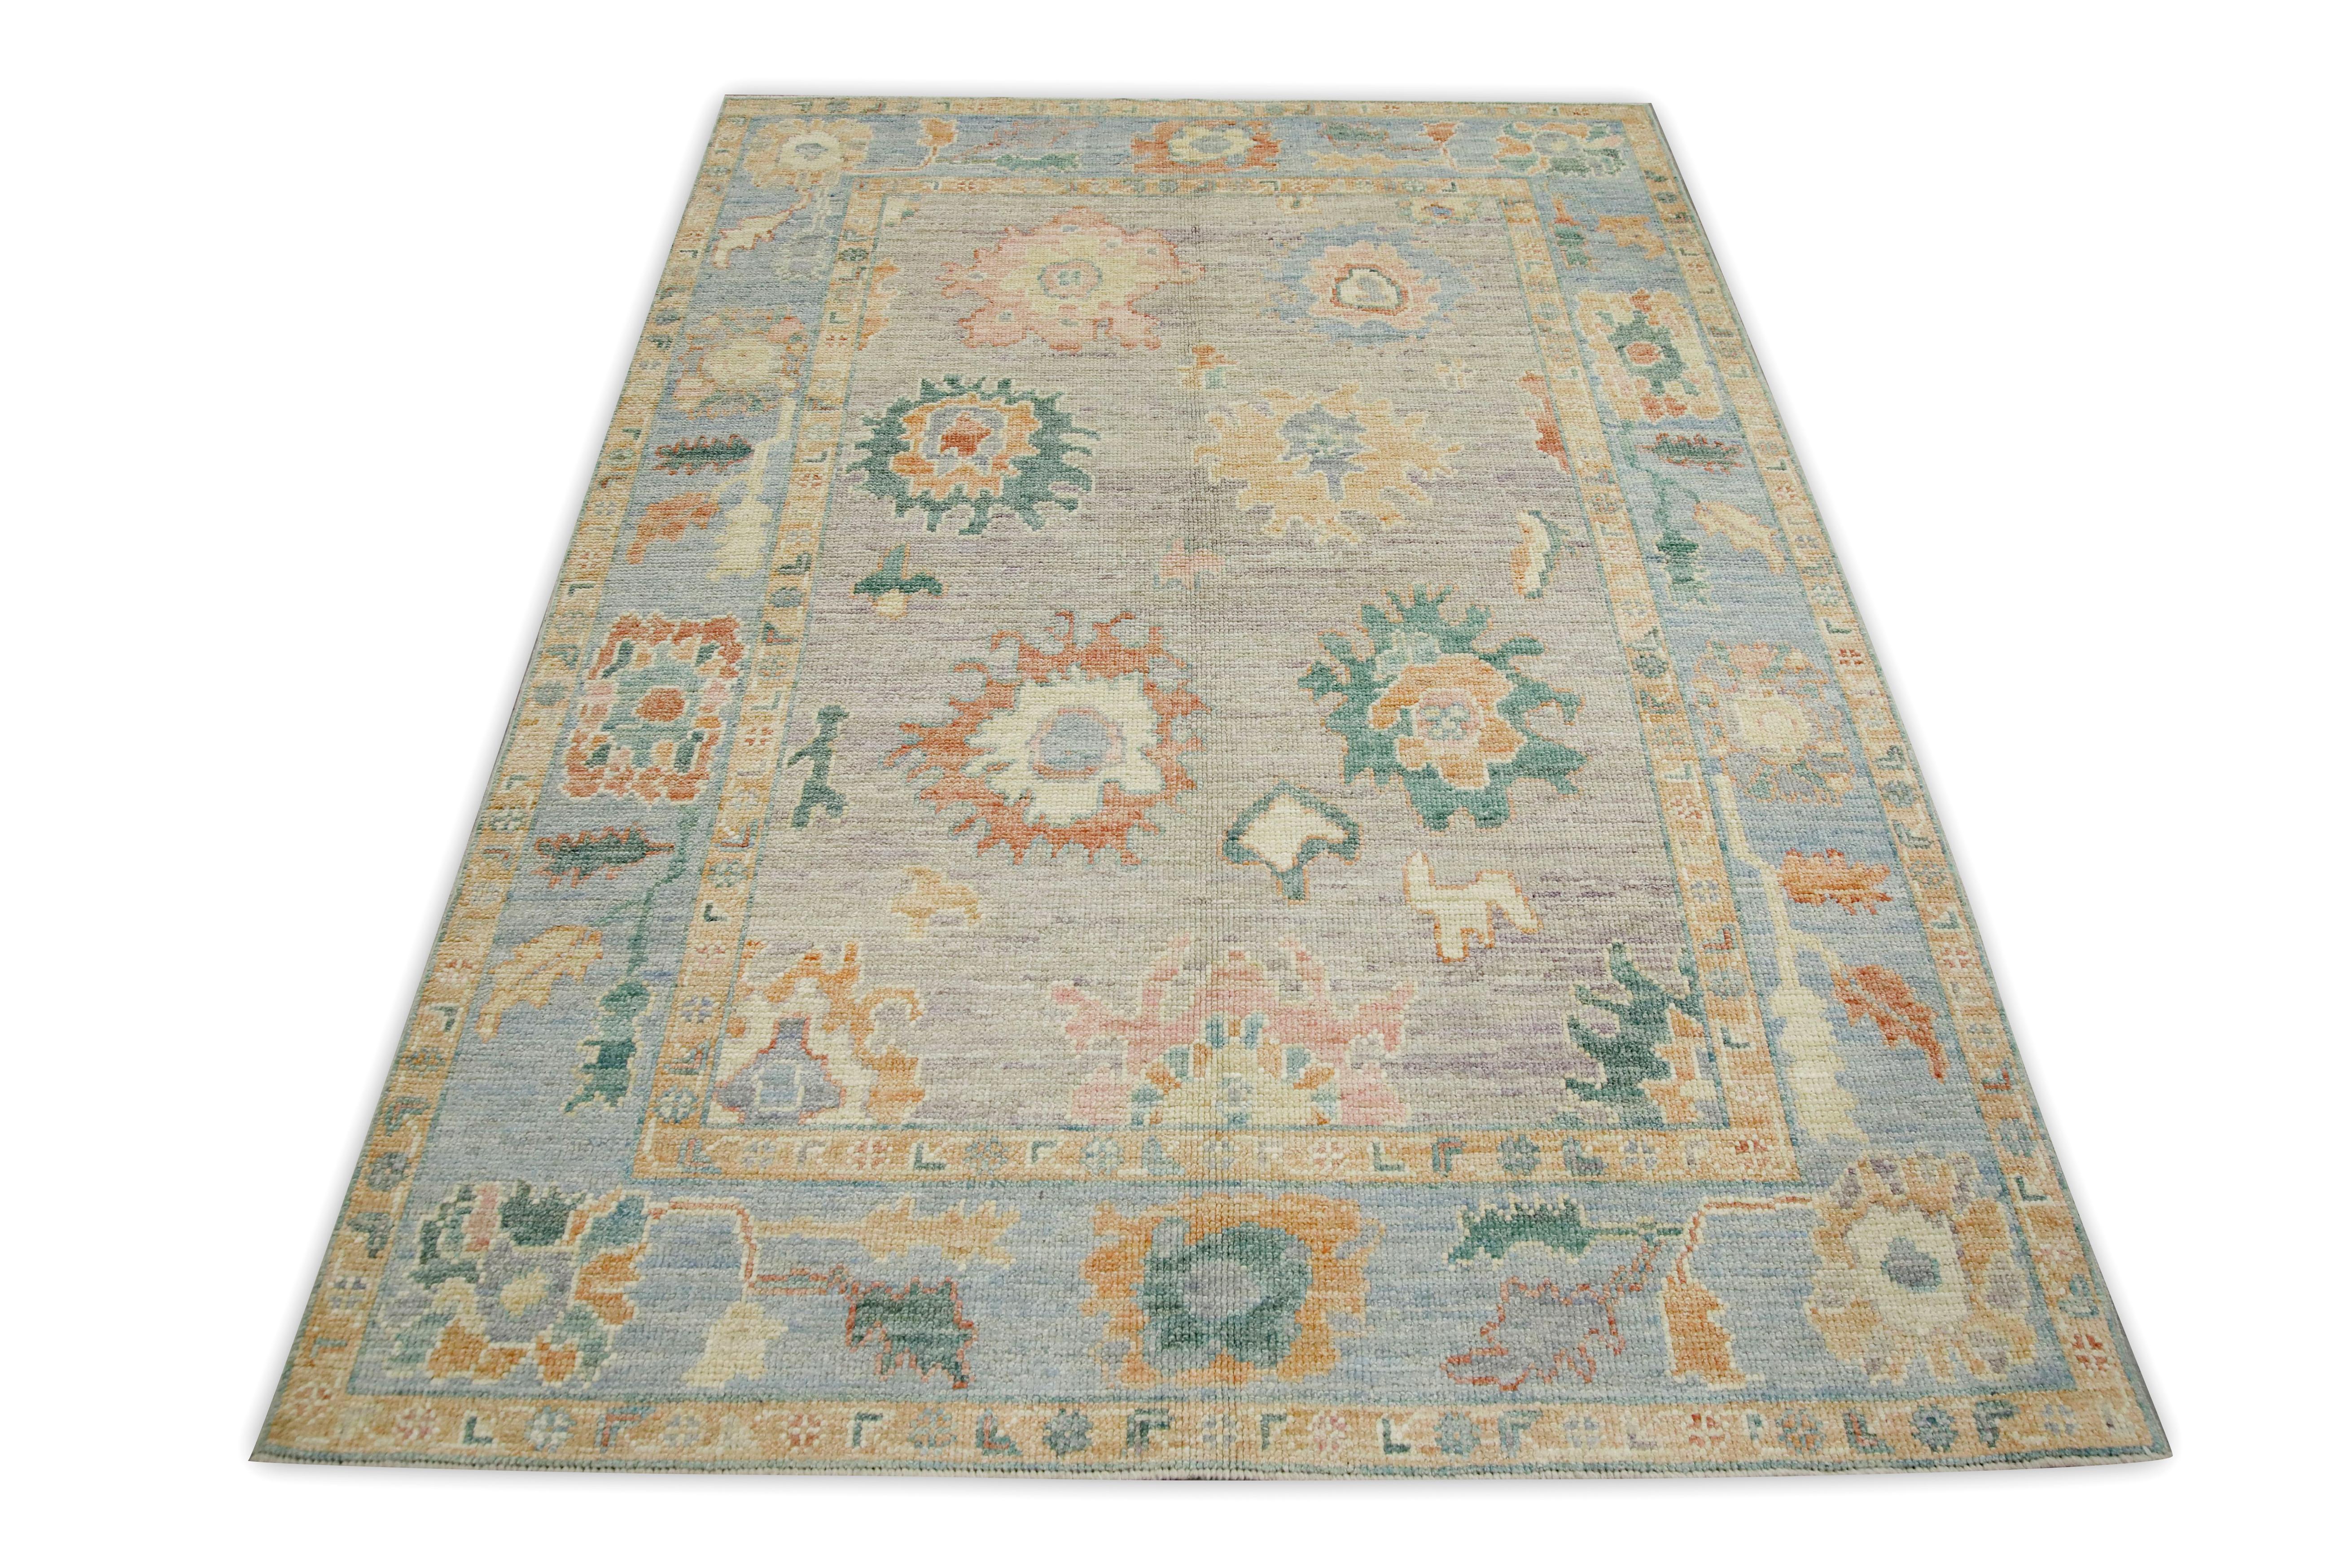 Contemporary Multicolor Floral Design Handwoven Wool Turkish Oushak Rug 5' x 6'11